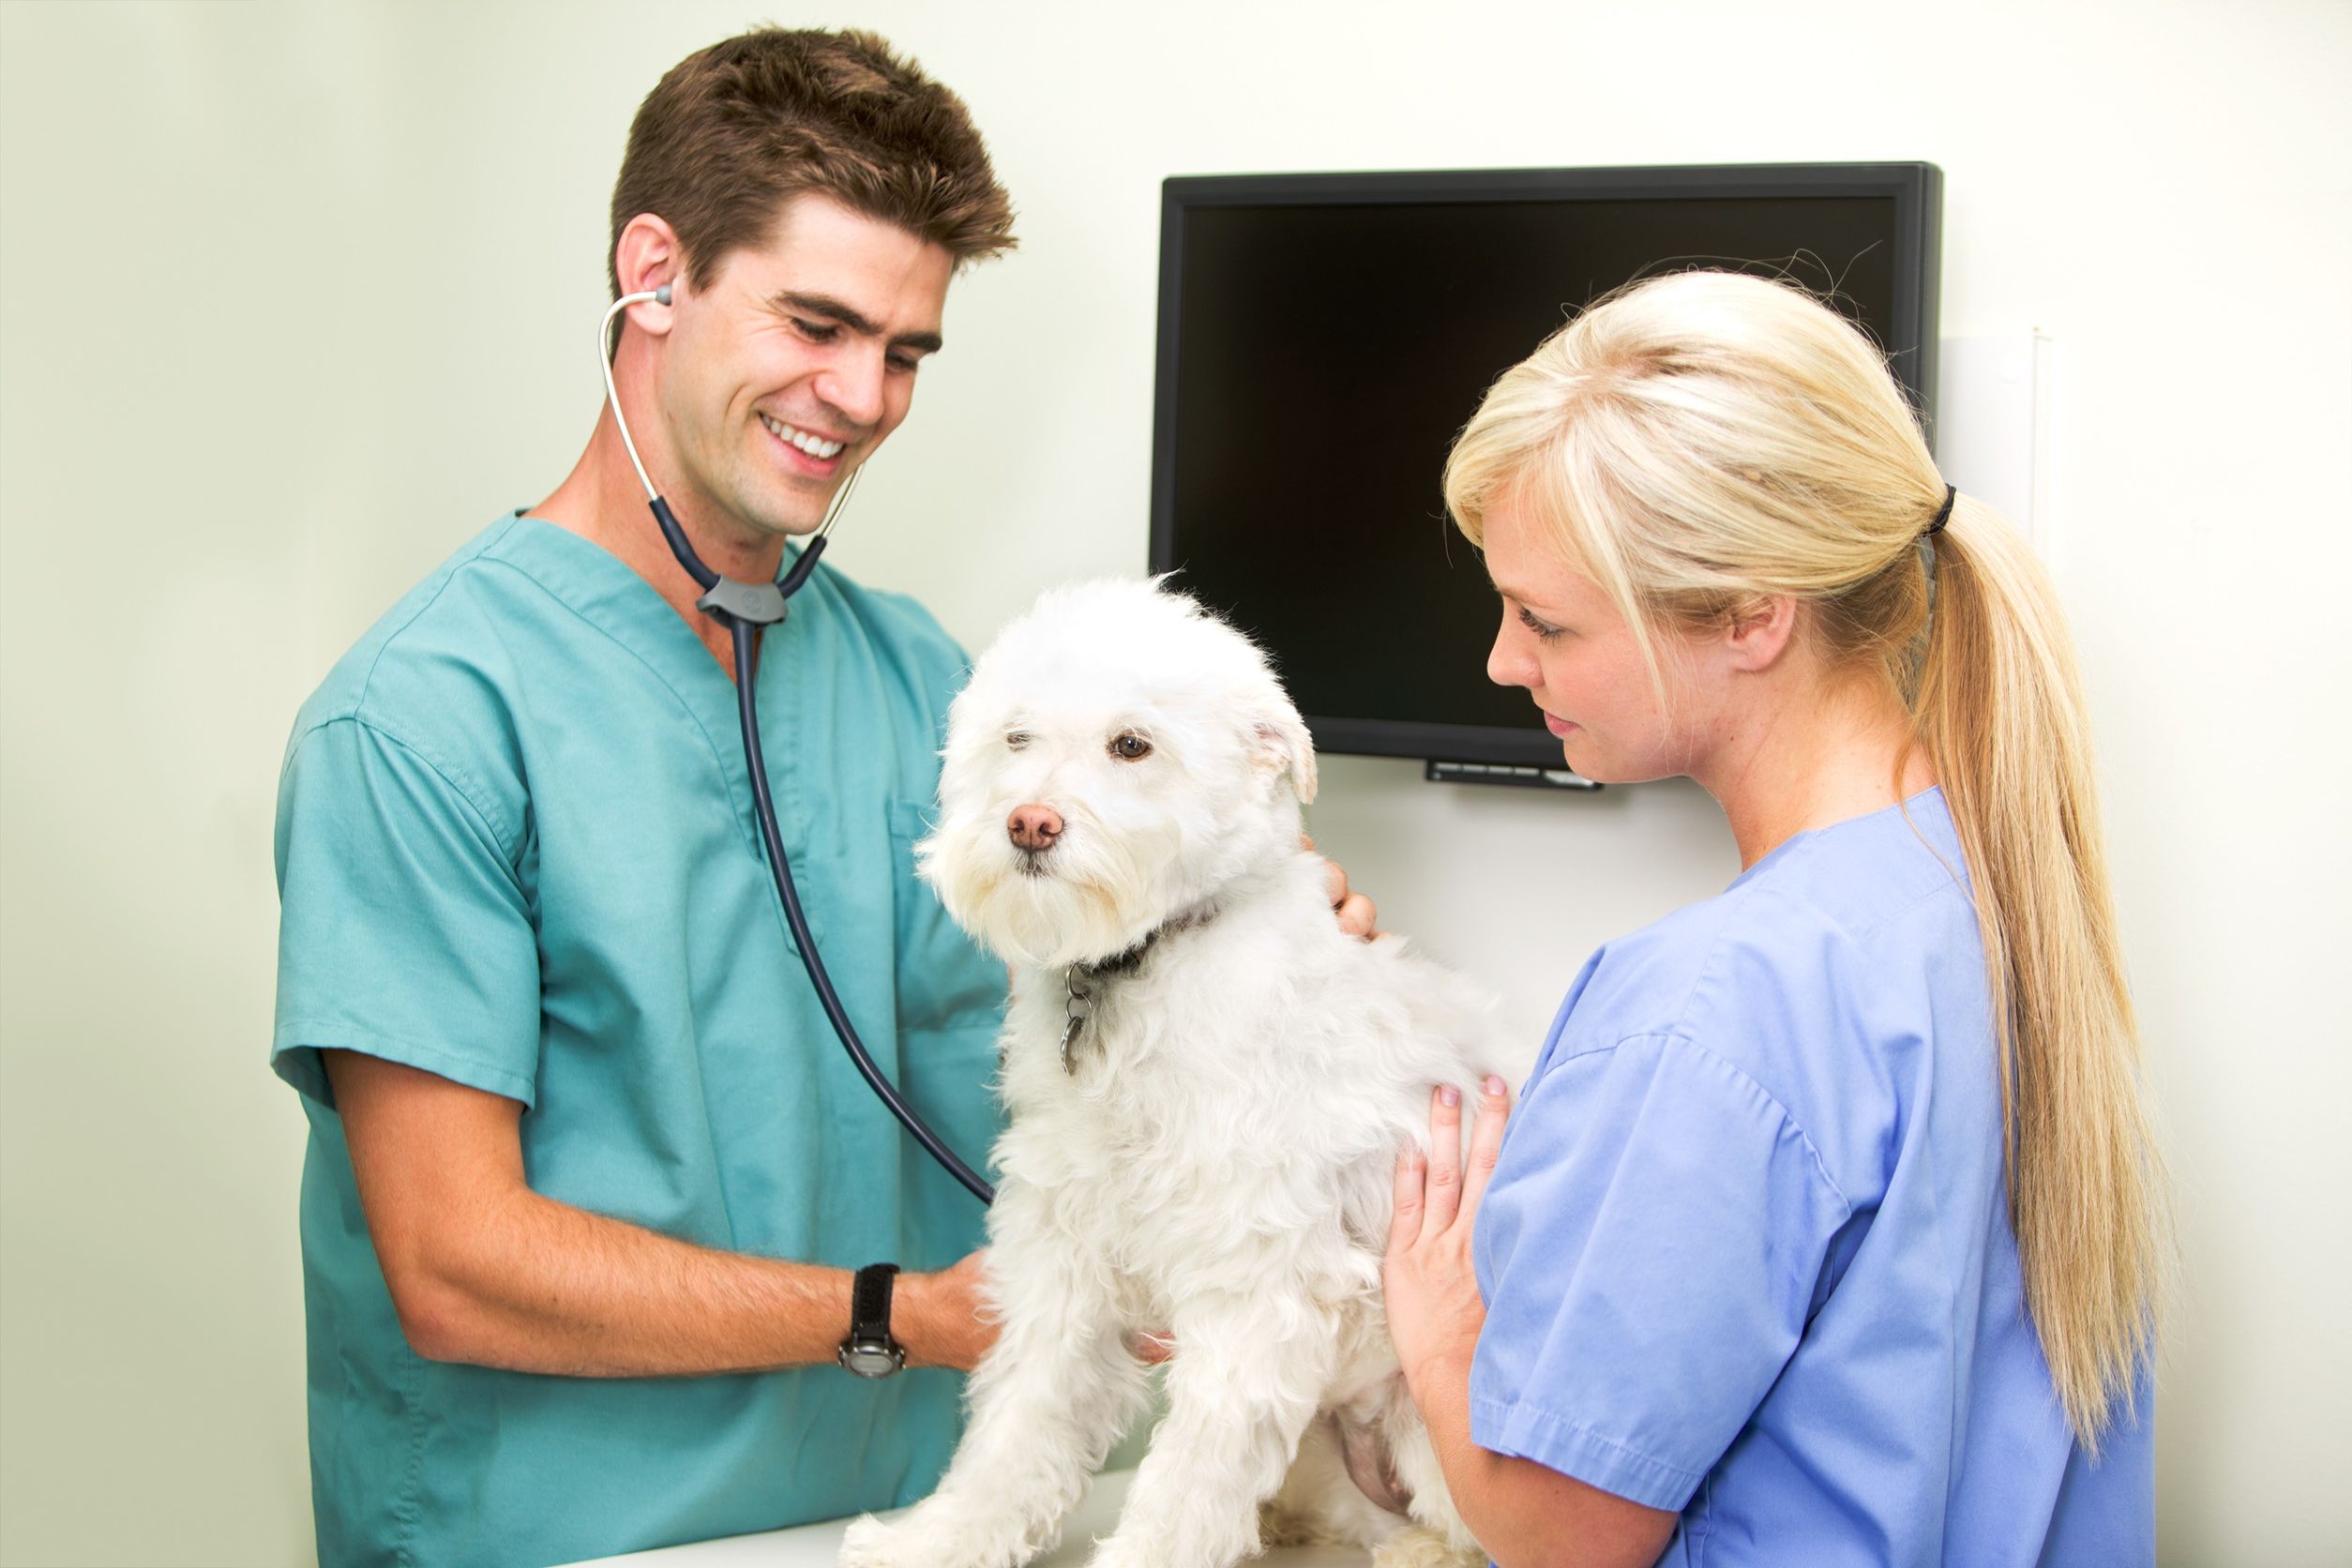 Make Your Visits to the Vet Less Stressful for Your Pet